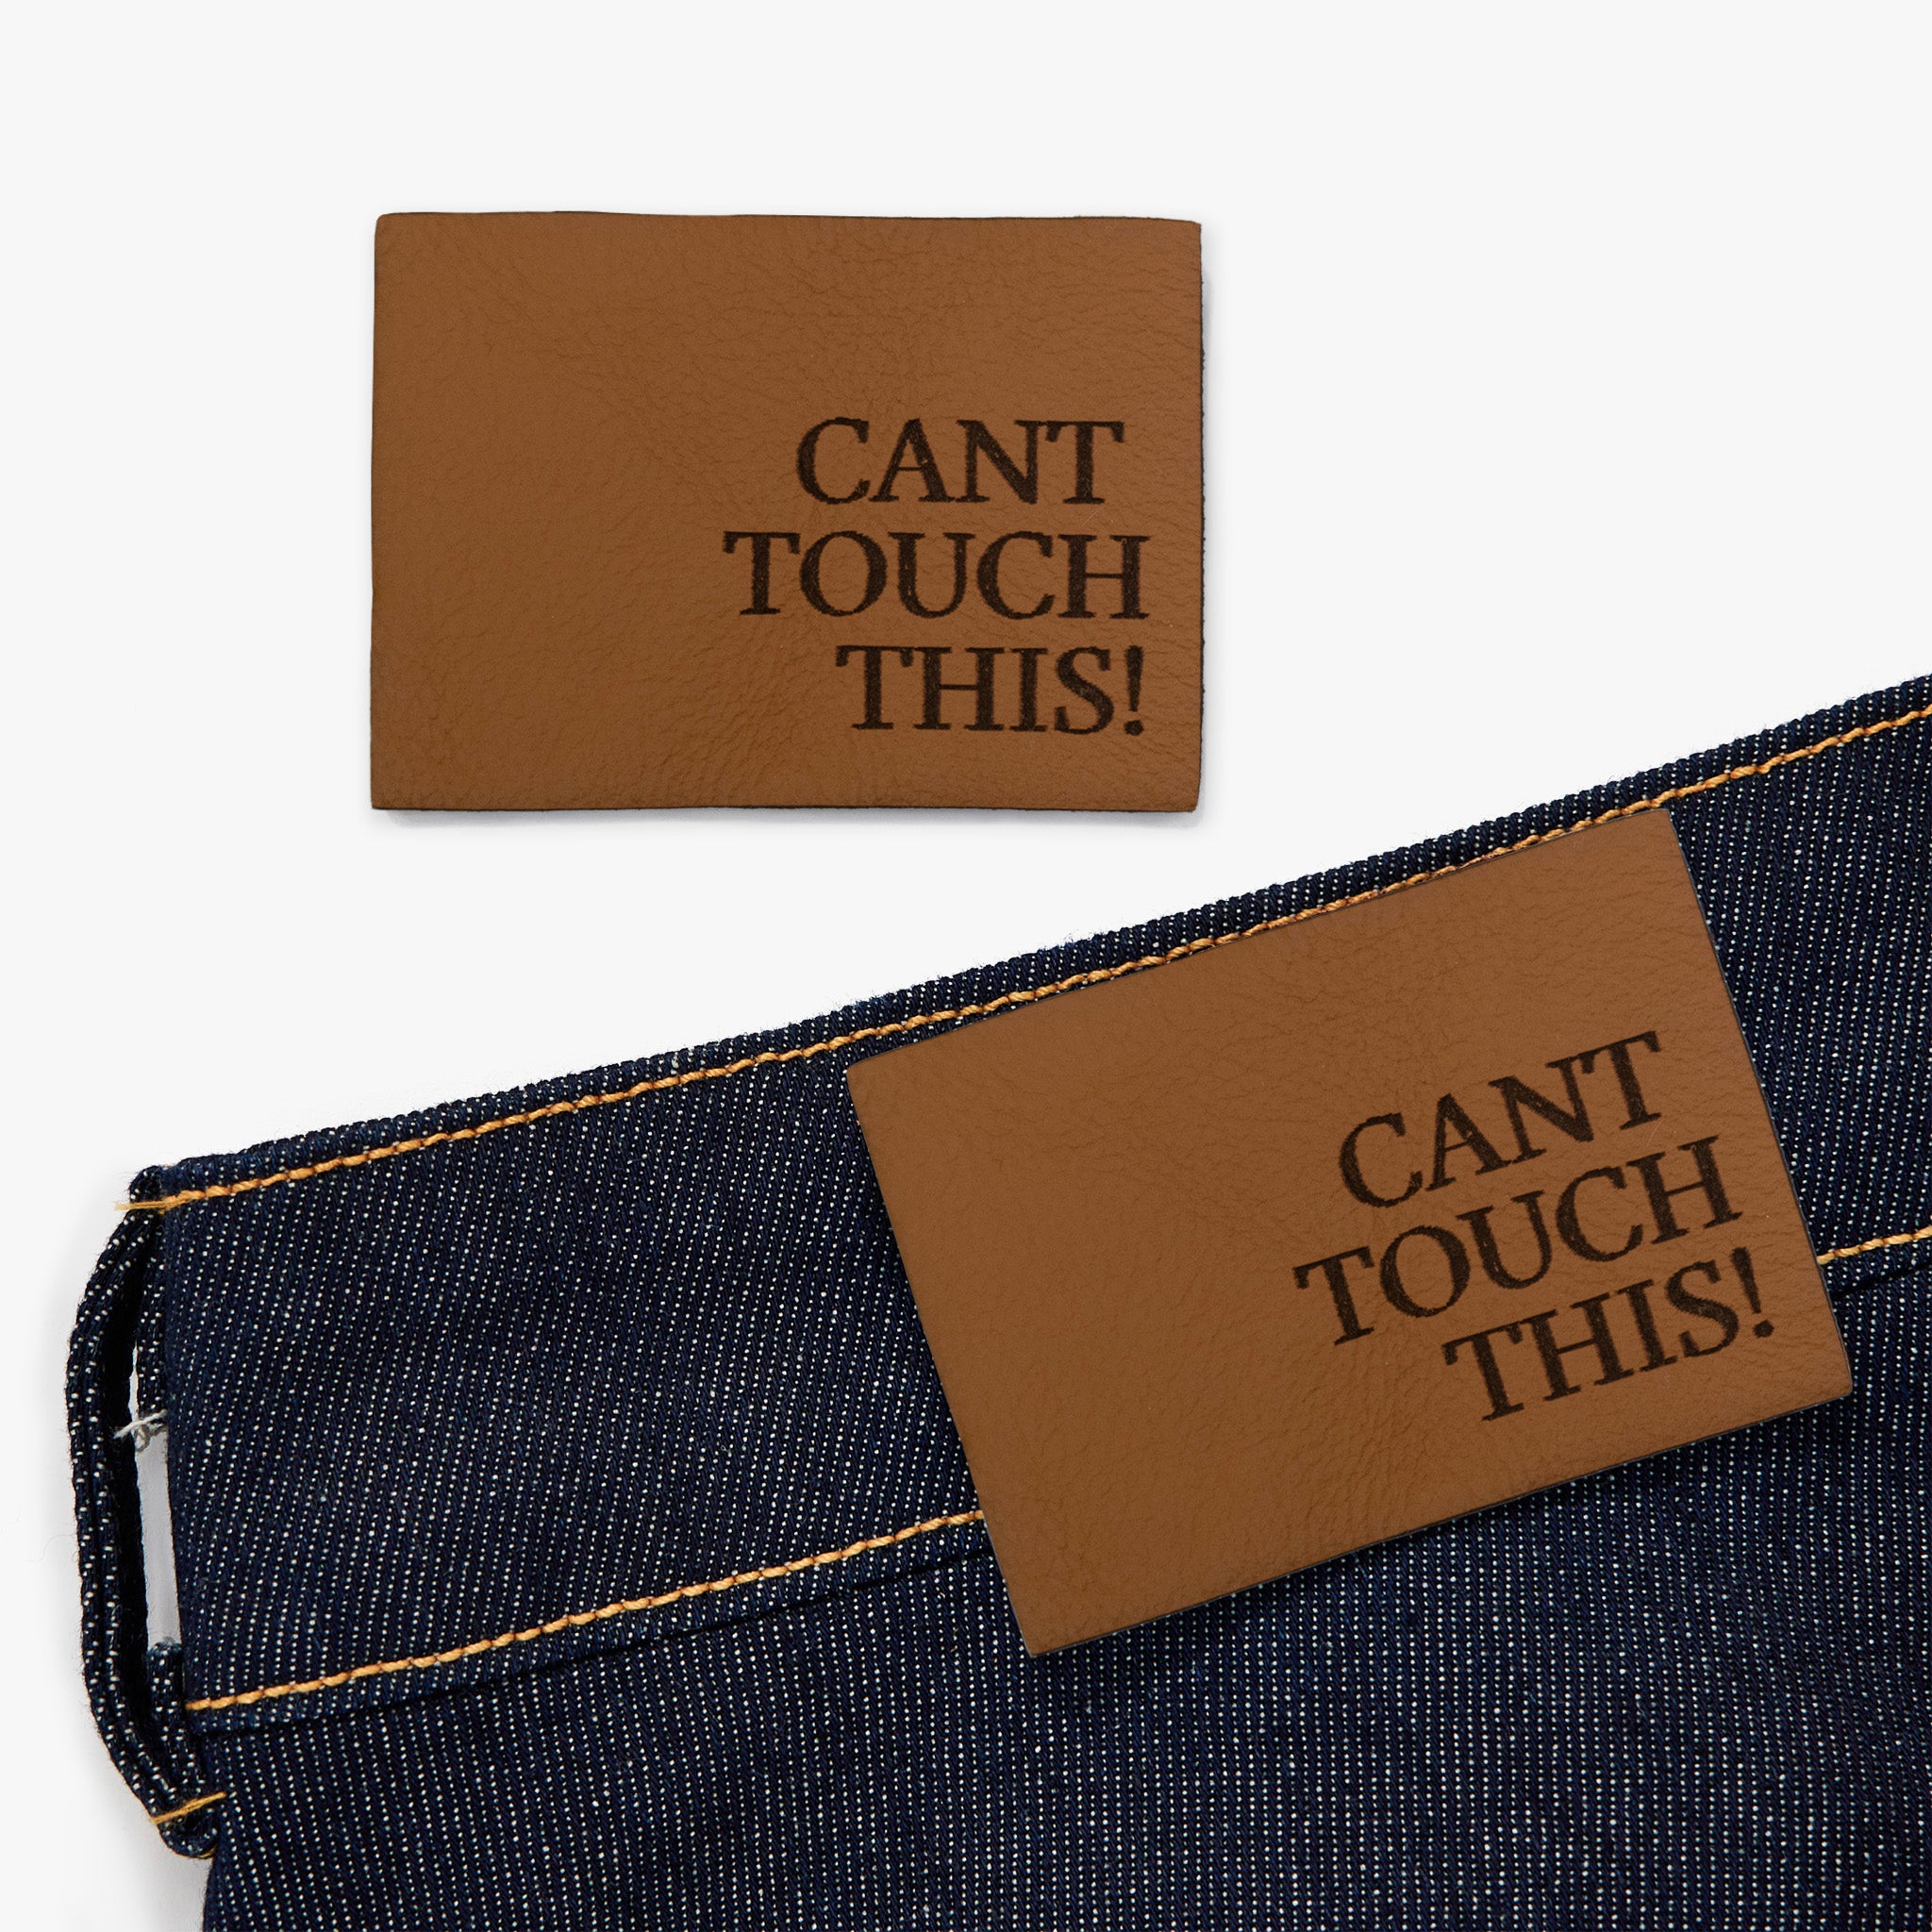 'CAN'T TOUCH THIS!' Pack of 2 Leather Jeans Labels